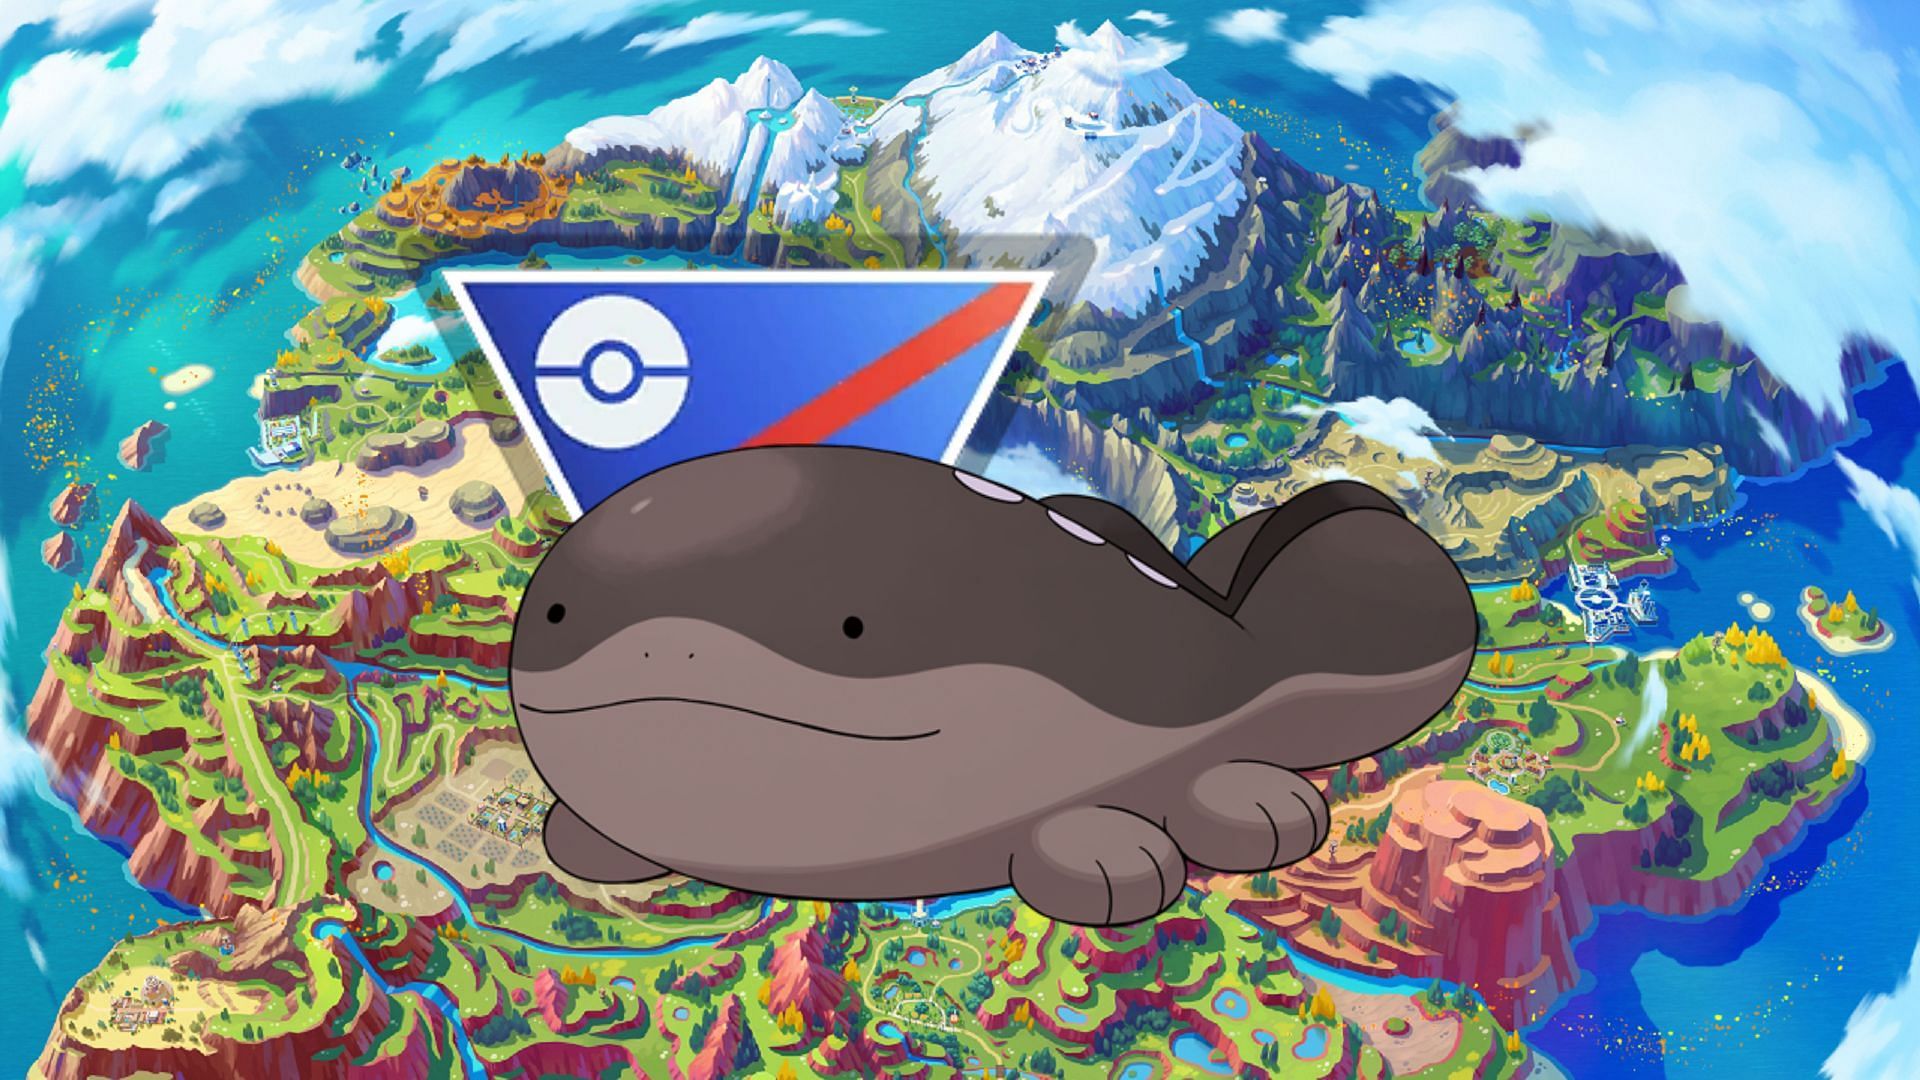 Clodsire in front of the Great League symbol in Pokemon GO.